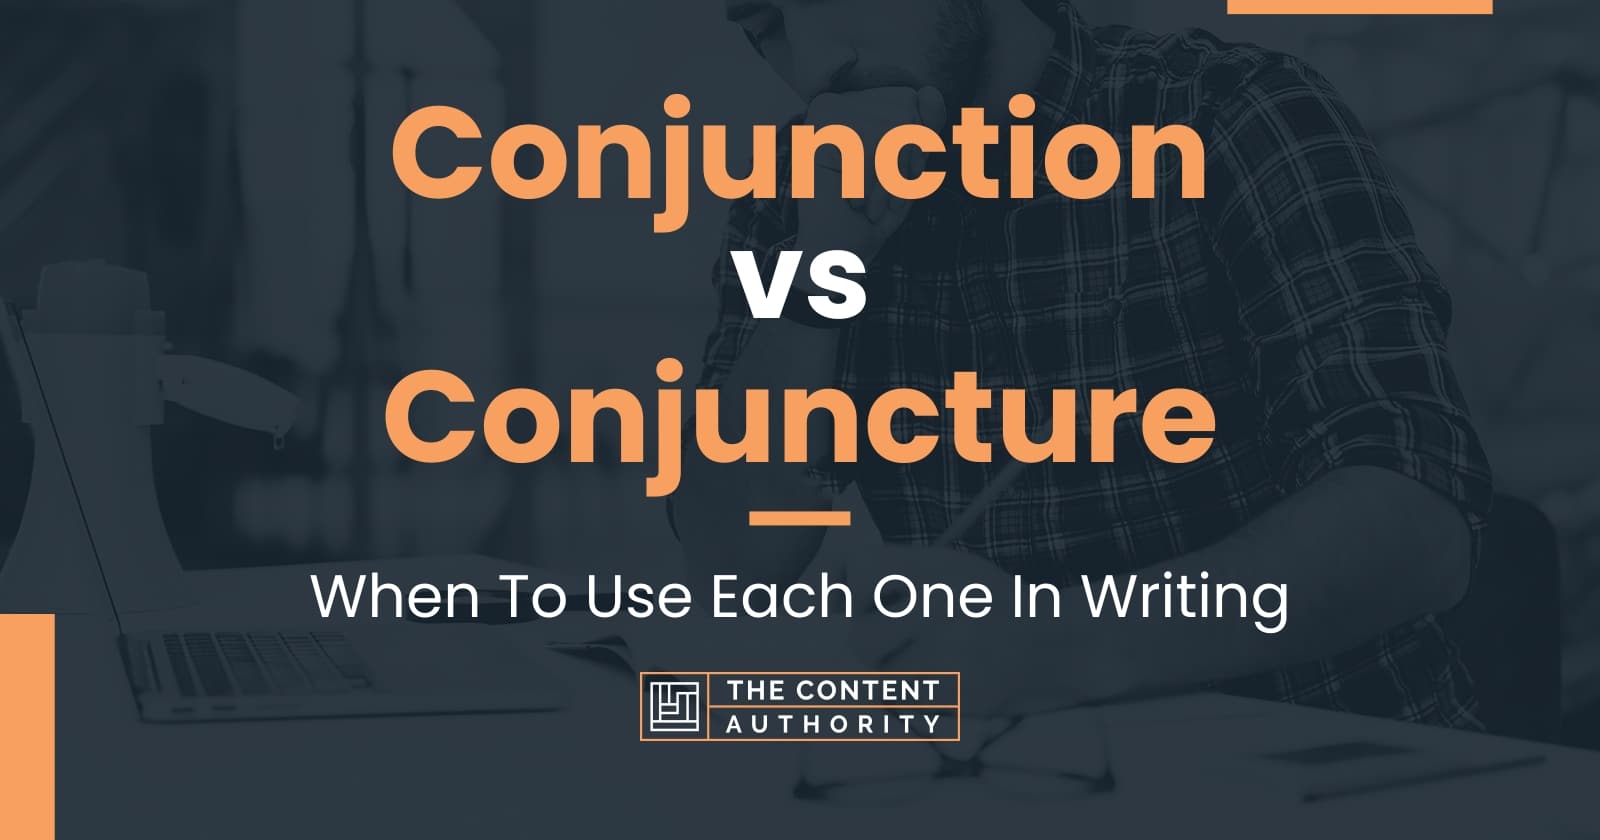 conjunction-vs-conjuncture-when-to-use-each-one-in-writing